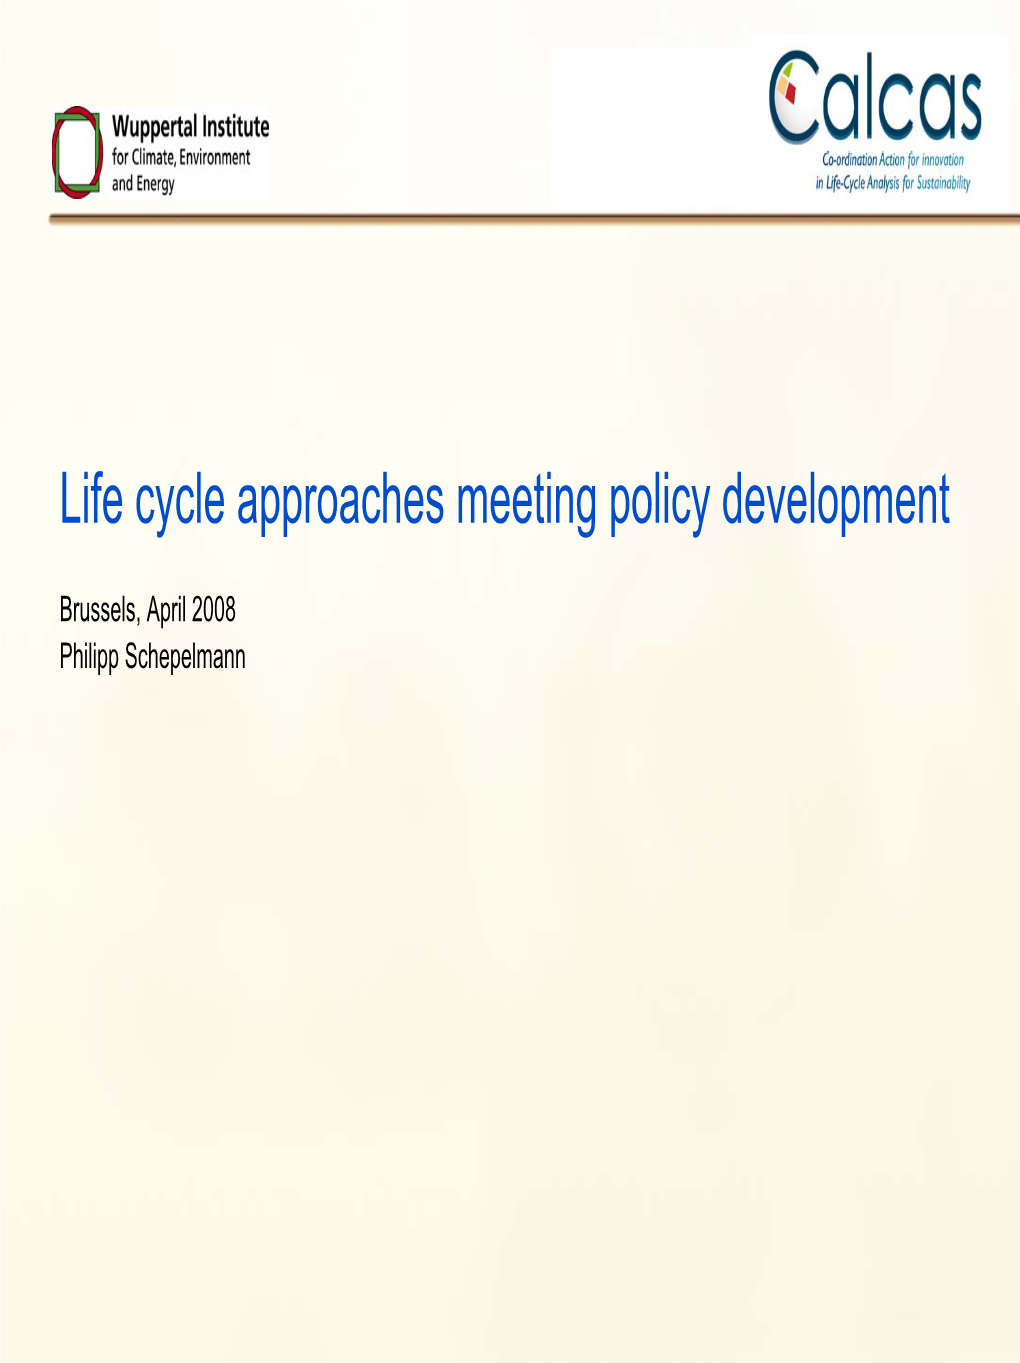 Life Cycle Approaches Meeting Policy Development